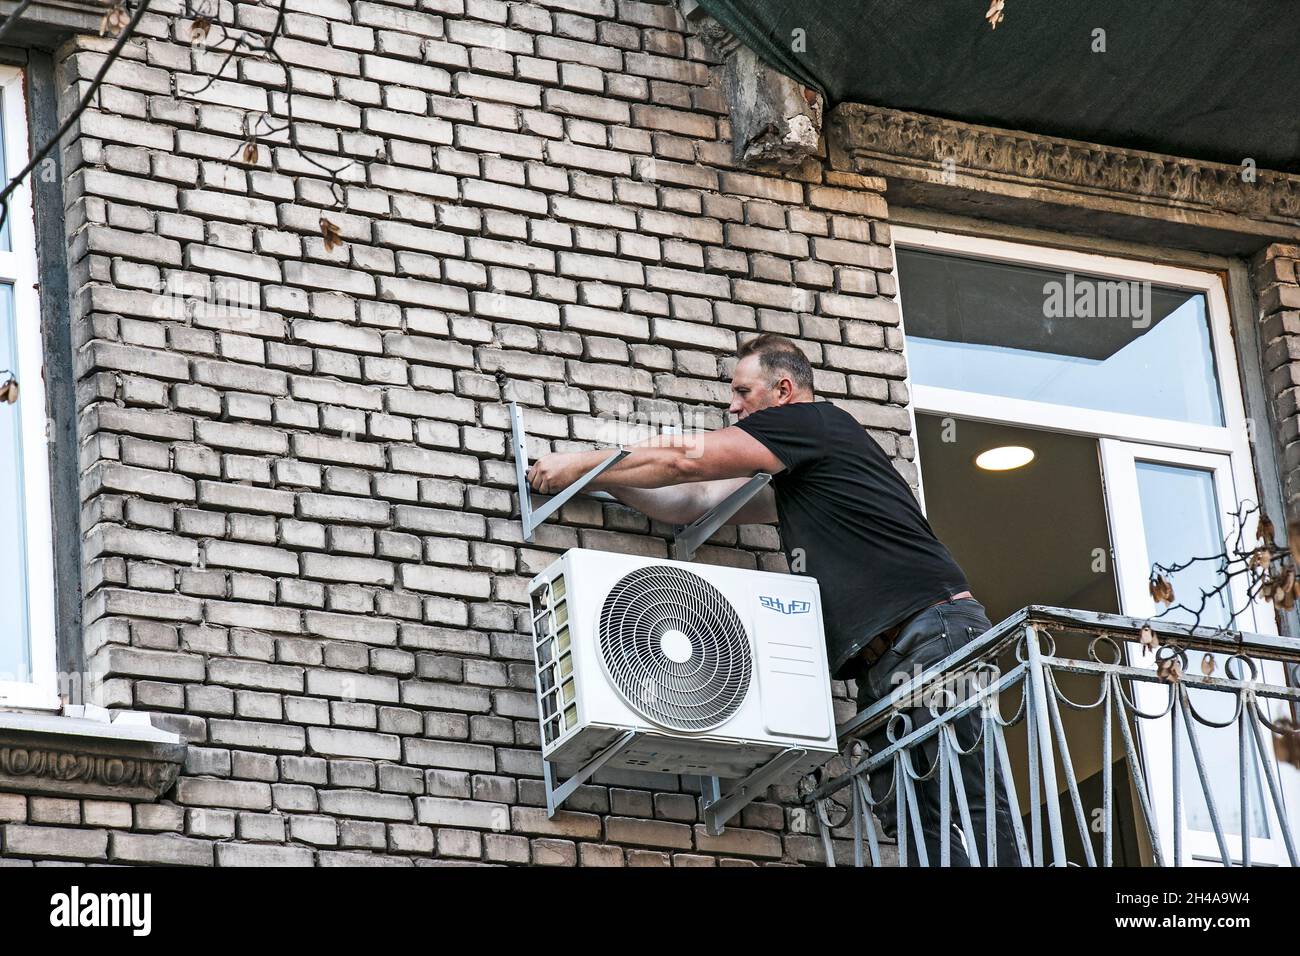 Dnepropetrovsk, Ukraine - 10.22.2021: A worker installs the bracket for the outdoor unit of the air conditioner on the wall of the house. Stock Photo